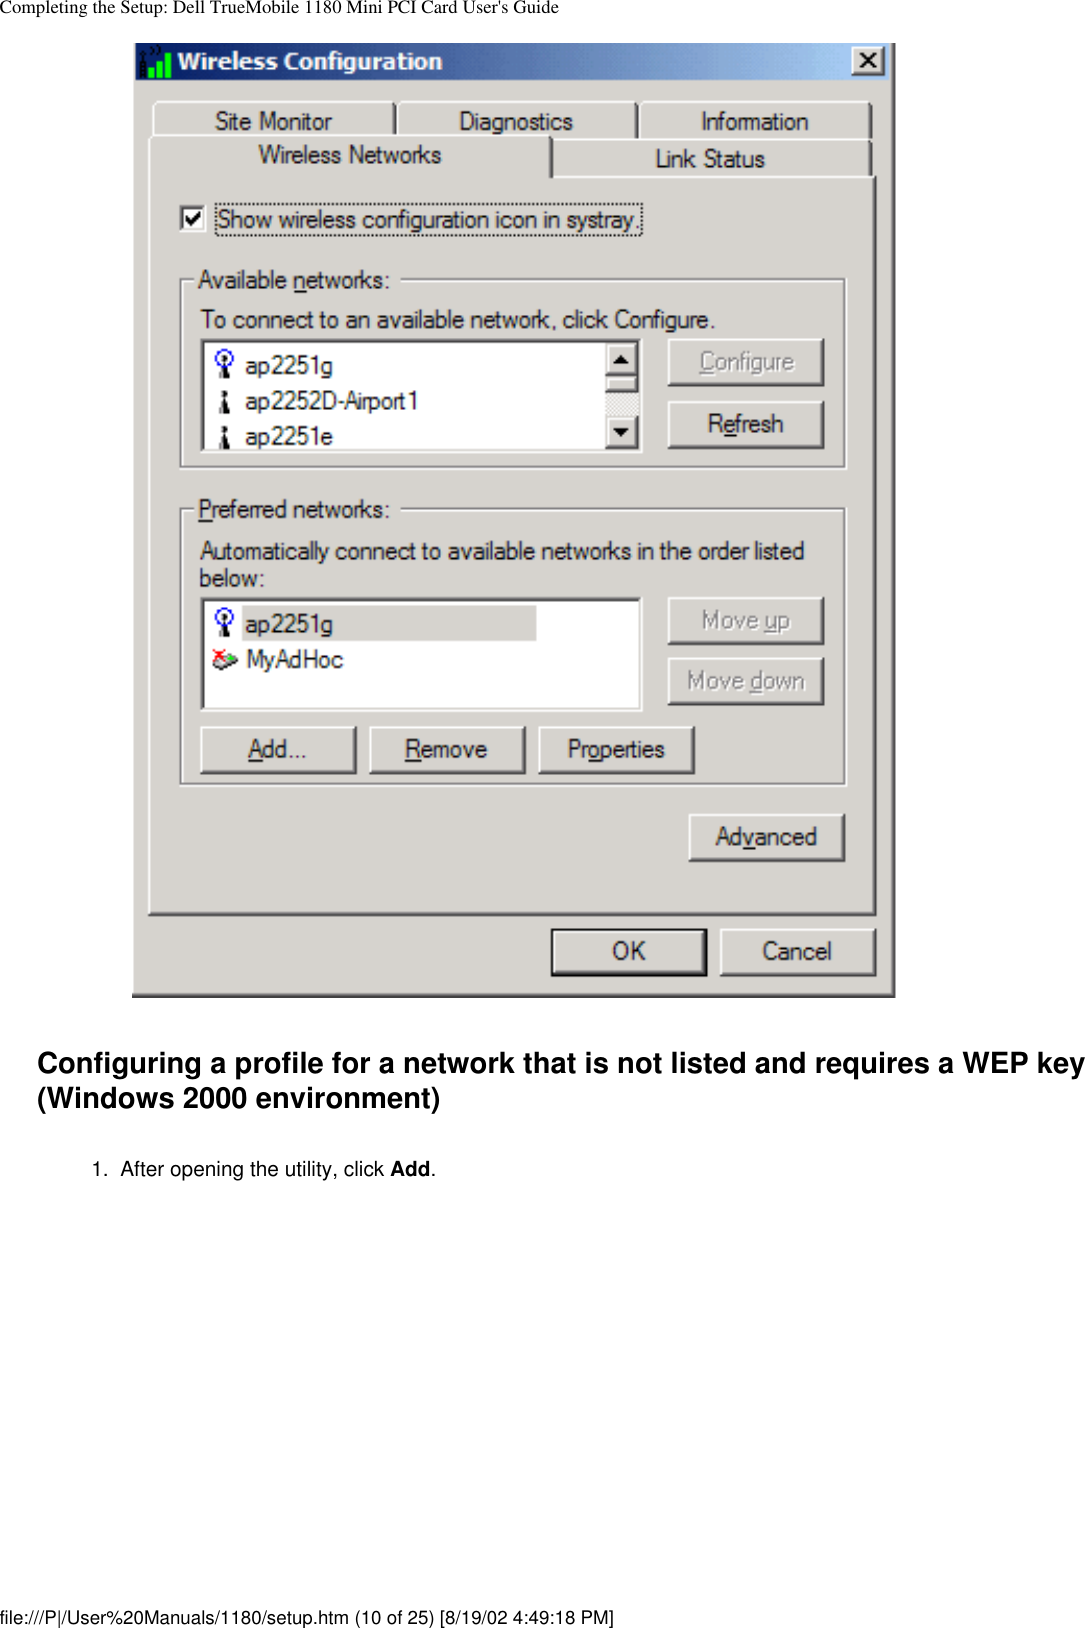 Completing the Setup: Dell TrueMobile 1180 Mini PCI Card User&apos;s GuideConfiguring a profile for a network that is not listed and requires a WEP key (Windows 2000 environment)1.  After opening the utility, click Add. file:///P|/User%20Manuals/1180/setup.htm (10 of 25) [8/19/02 4:49:18 PM]